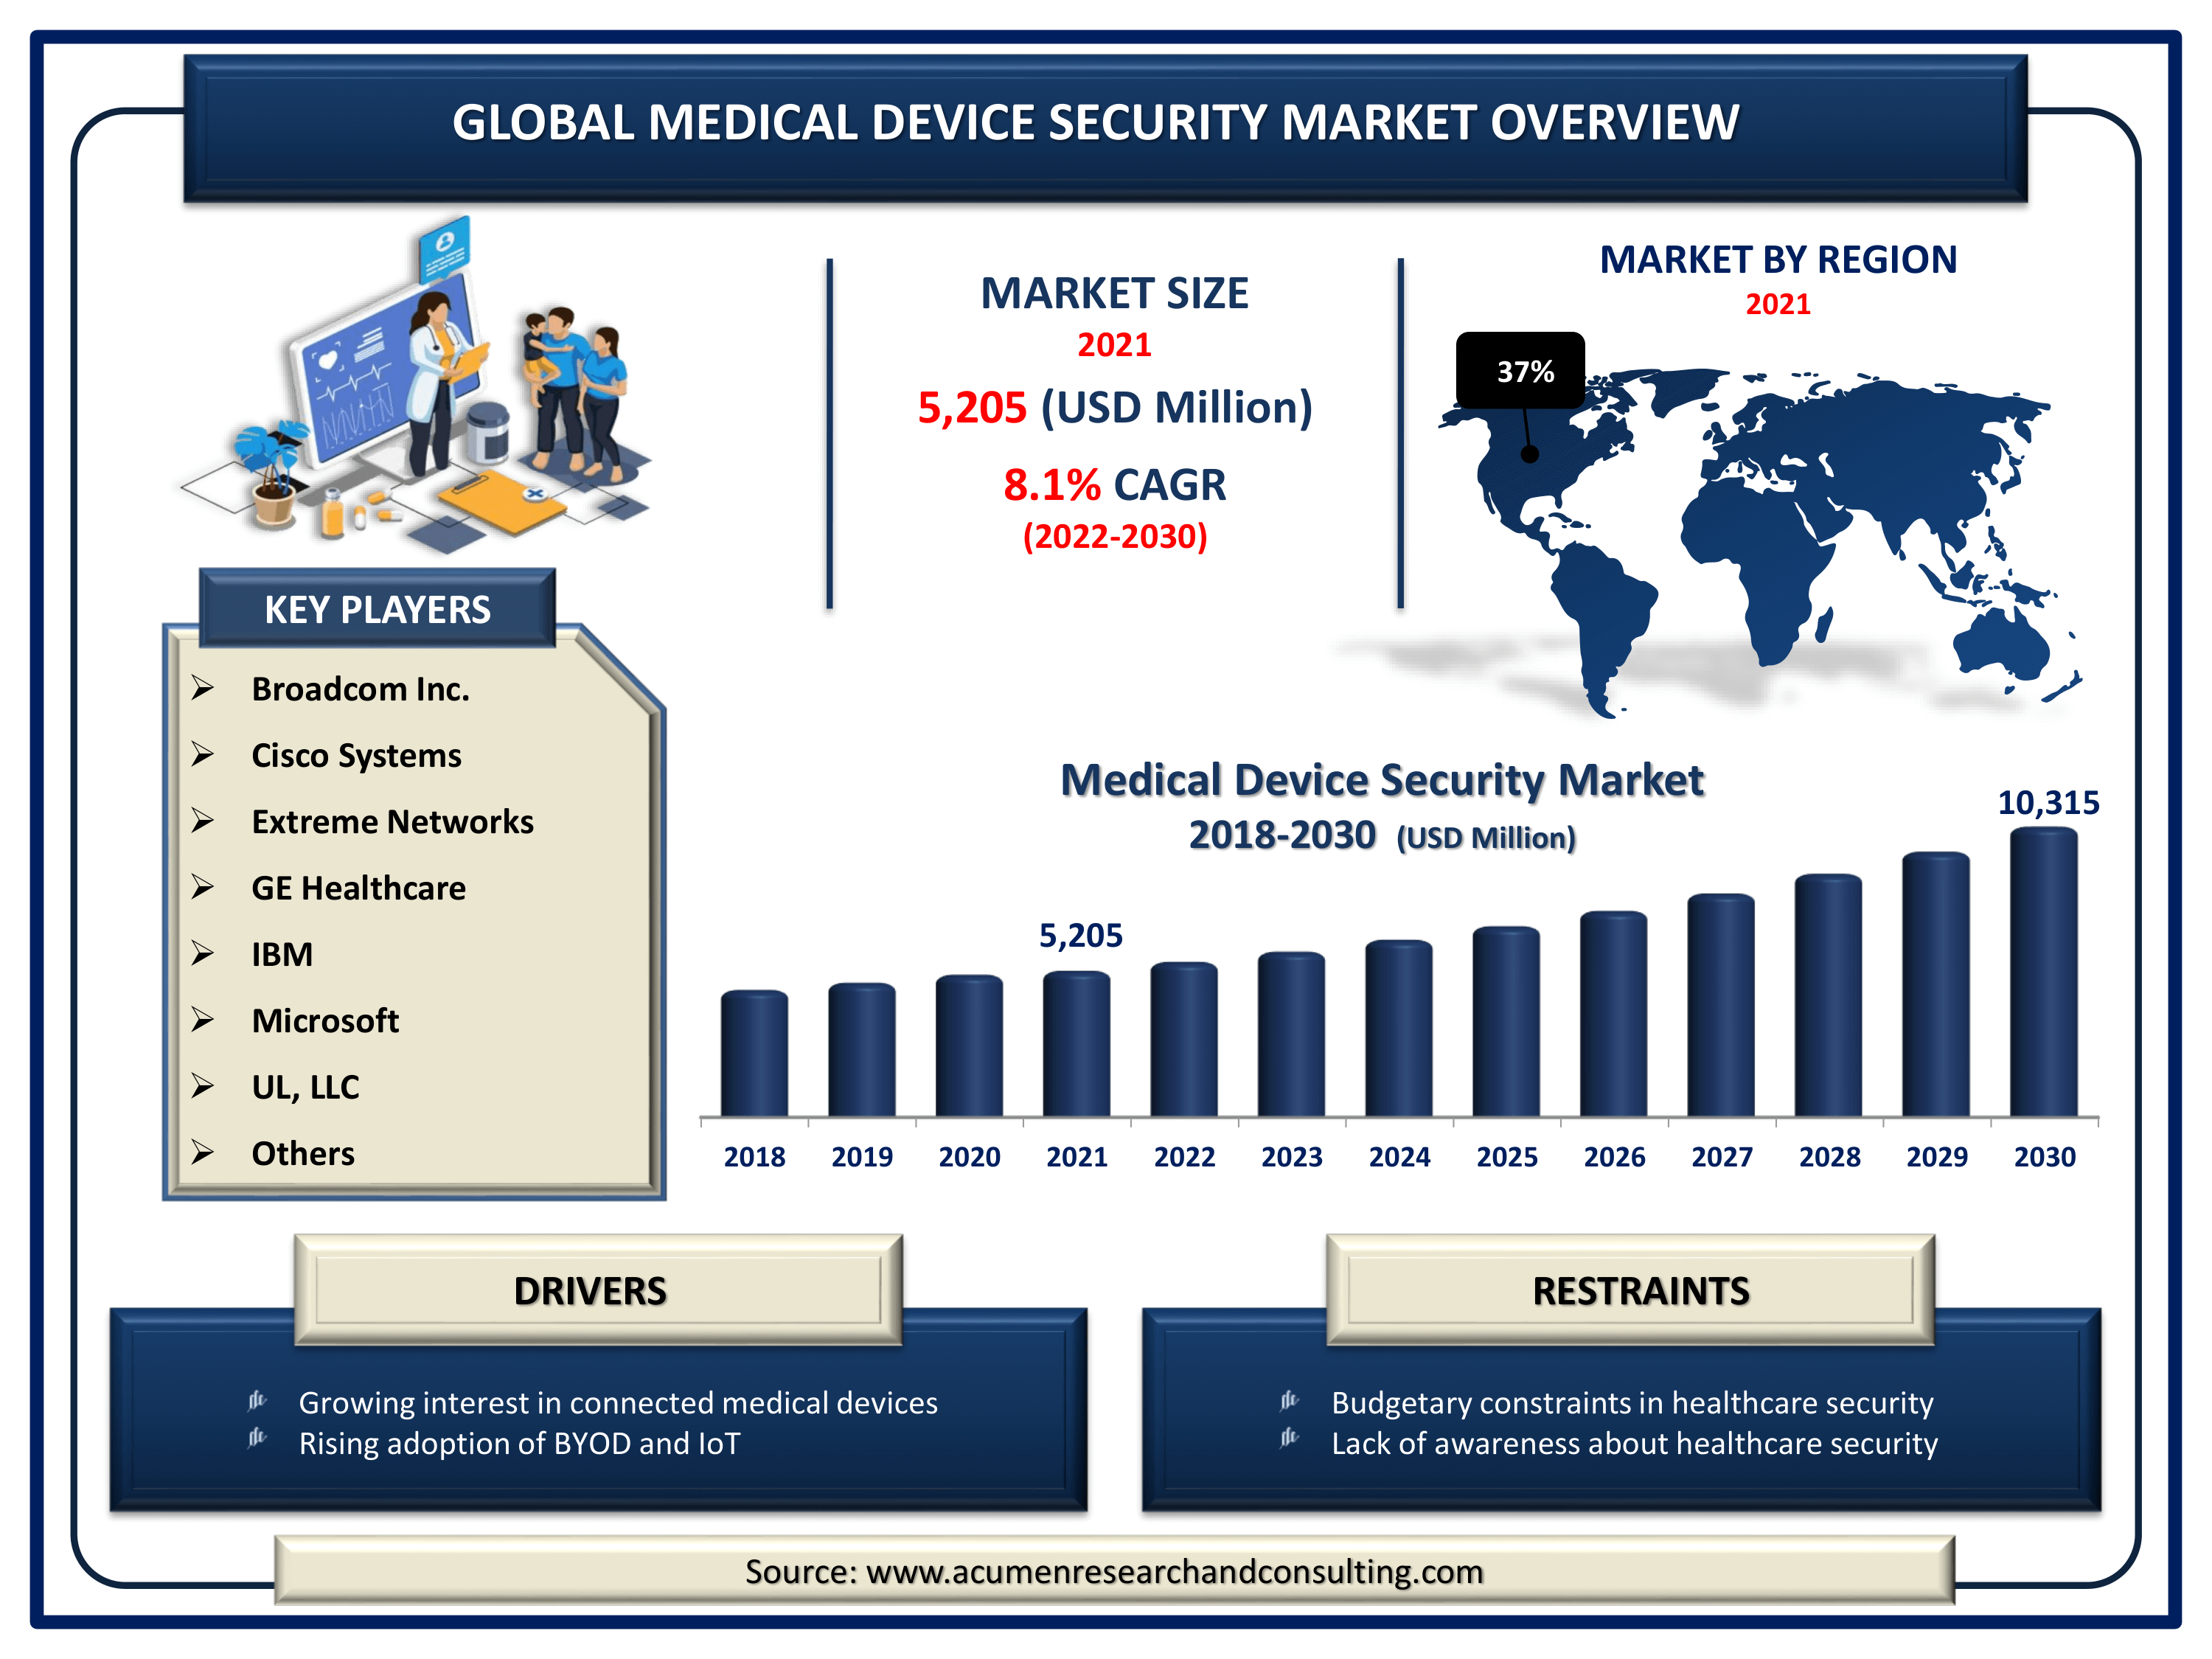 Global medical device security market revenue intended to gain USD 10,315 million by 2030 with a CAGR of 8.1% from 2022 to 2030